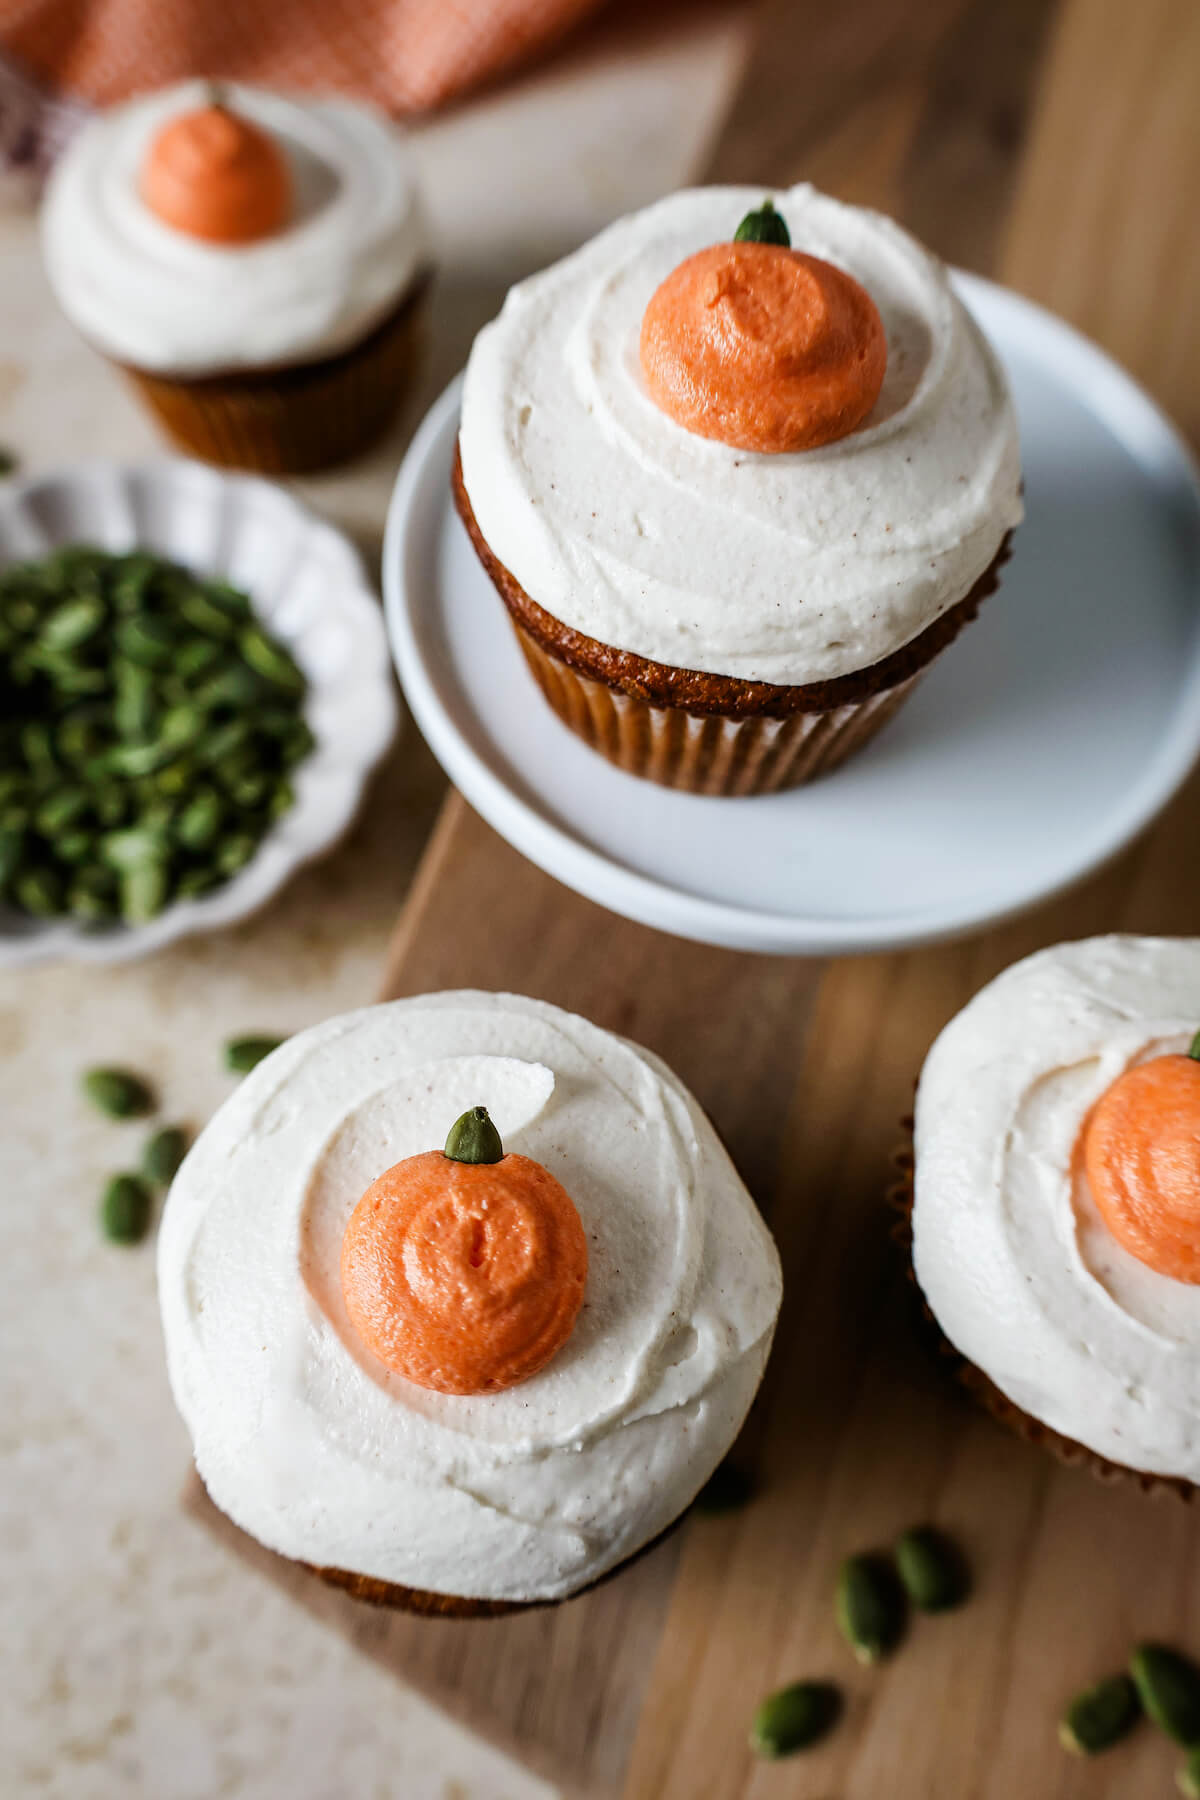 Pumpkin spice cupcakes with frosting and an orange frosting pumpkin on top as garnish.